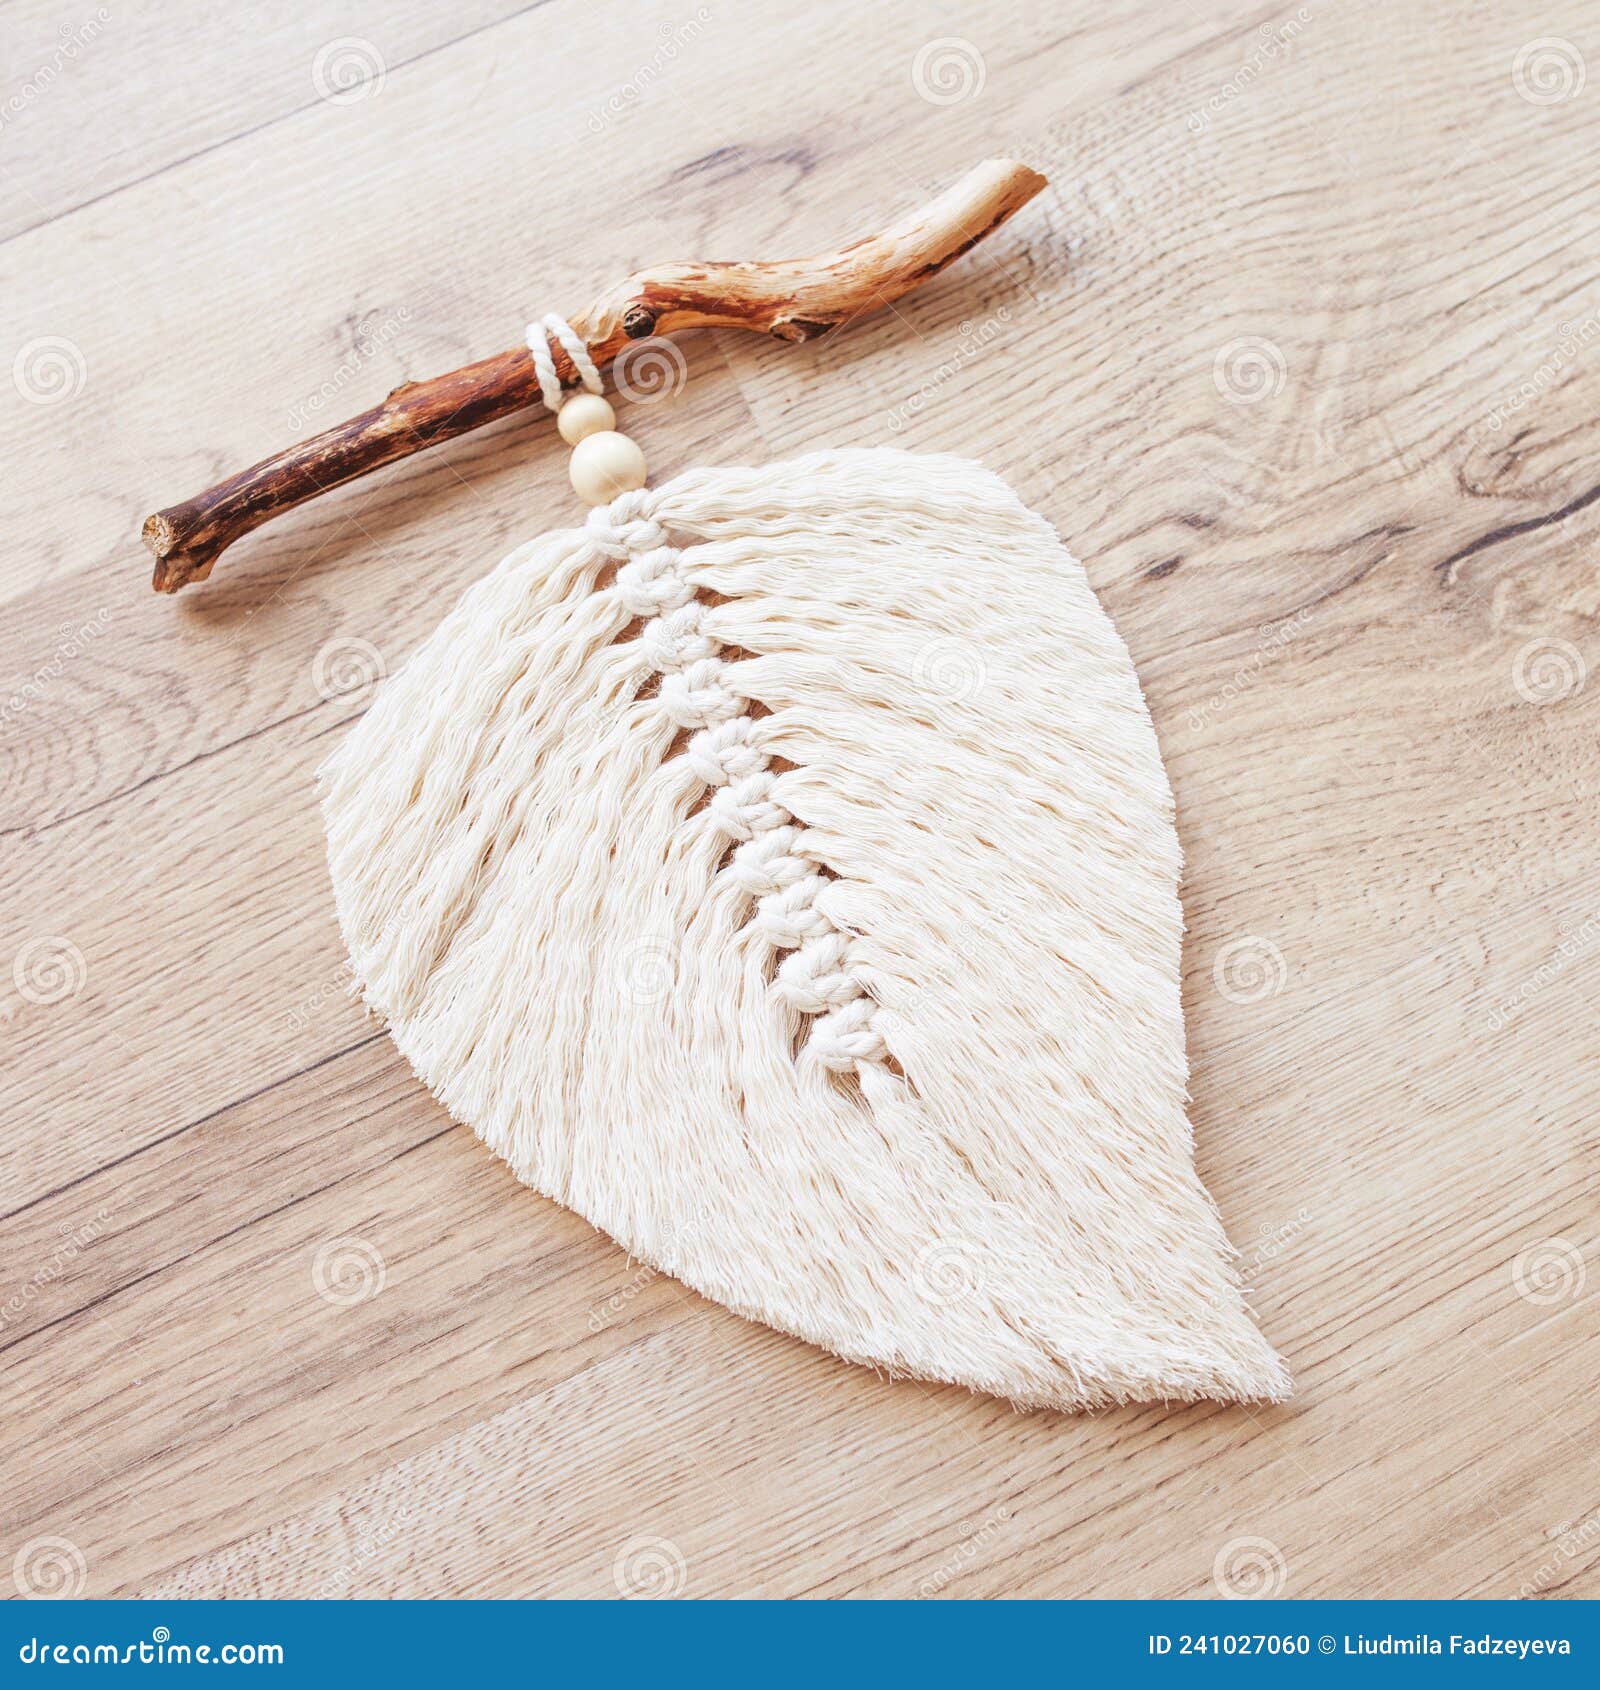 Macrame Leaf in Natural Color on a Wooden Table. Cotton Rope Decor